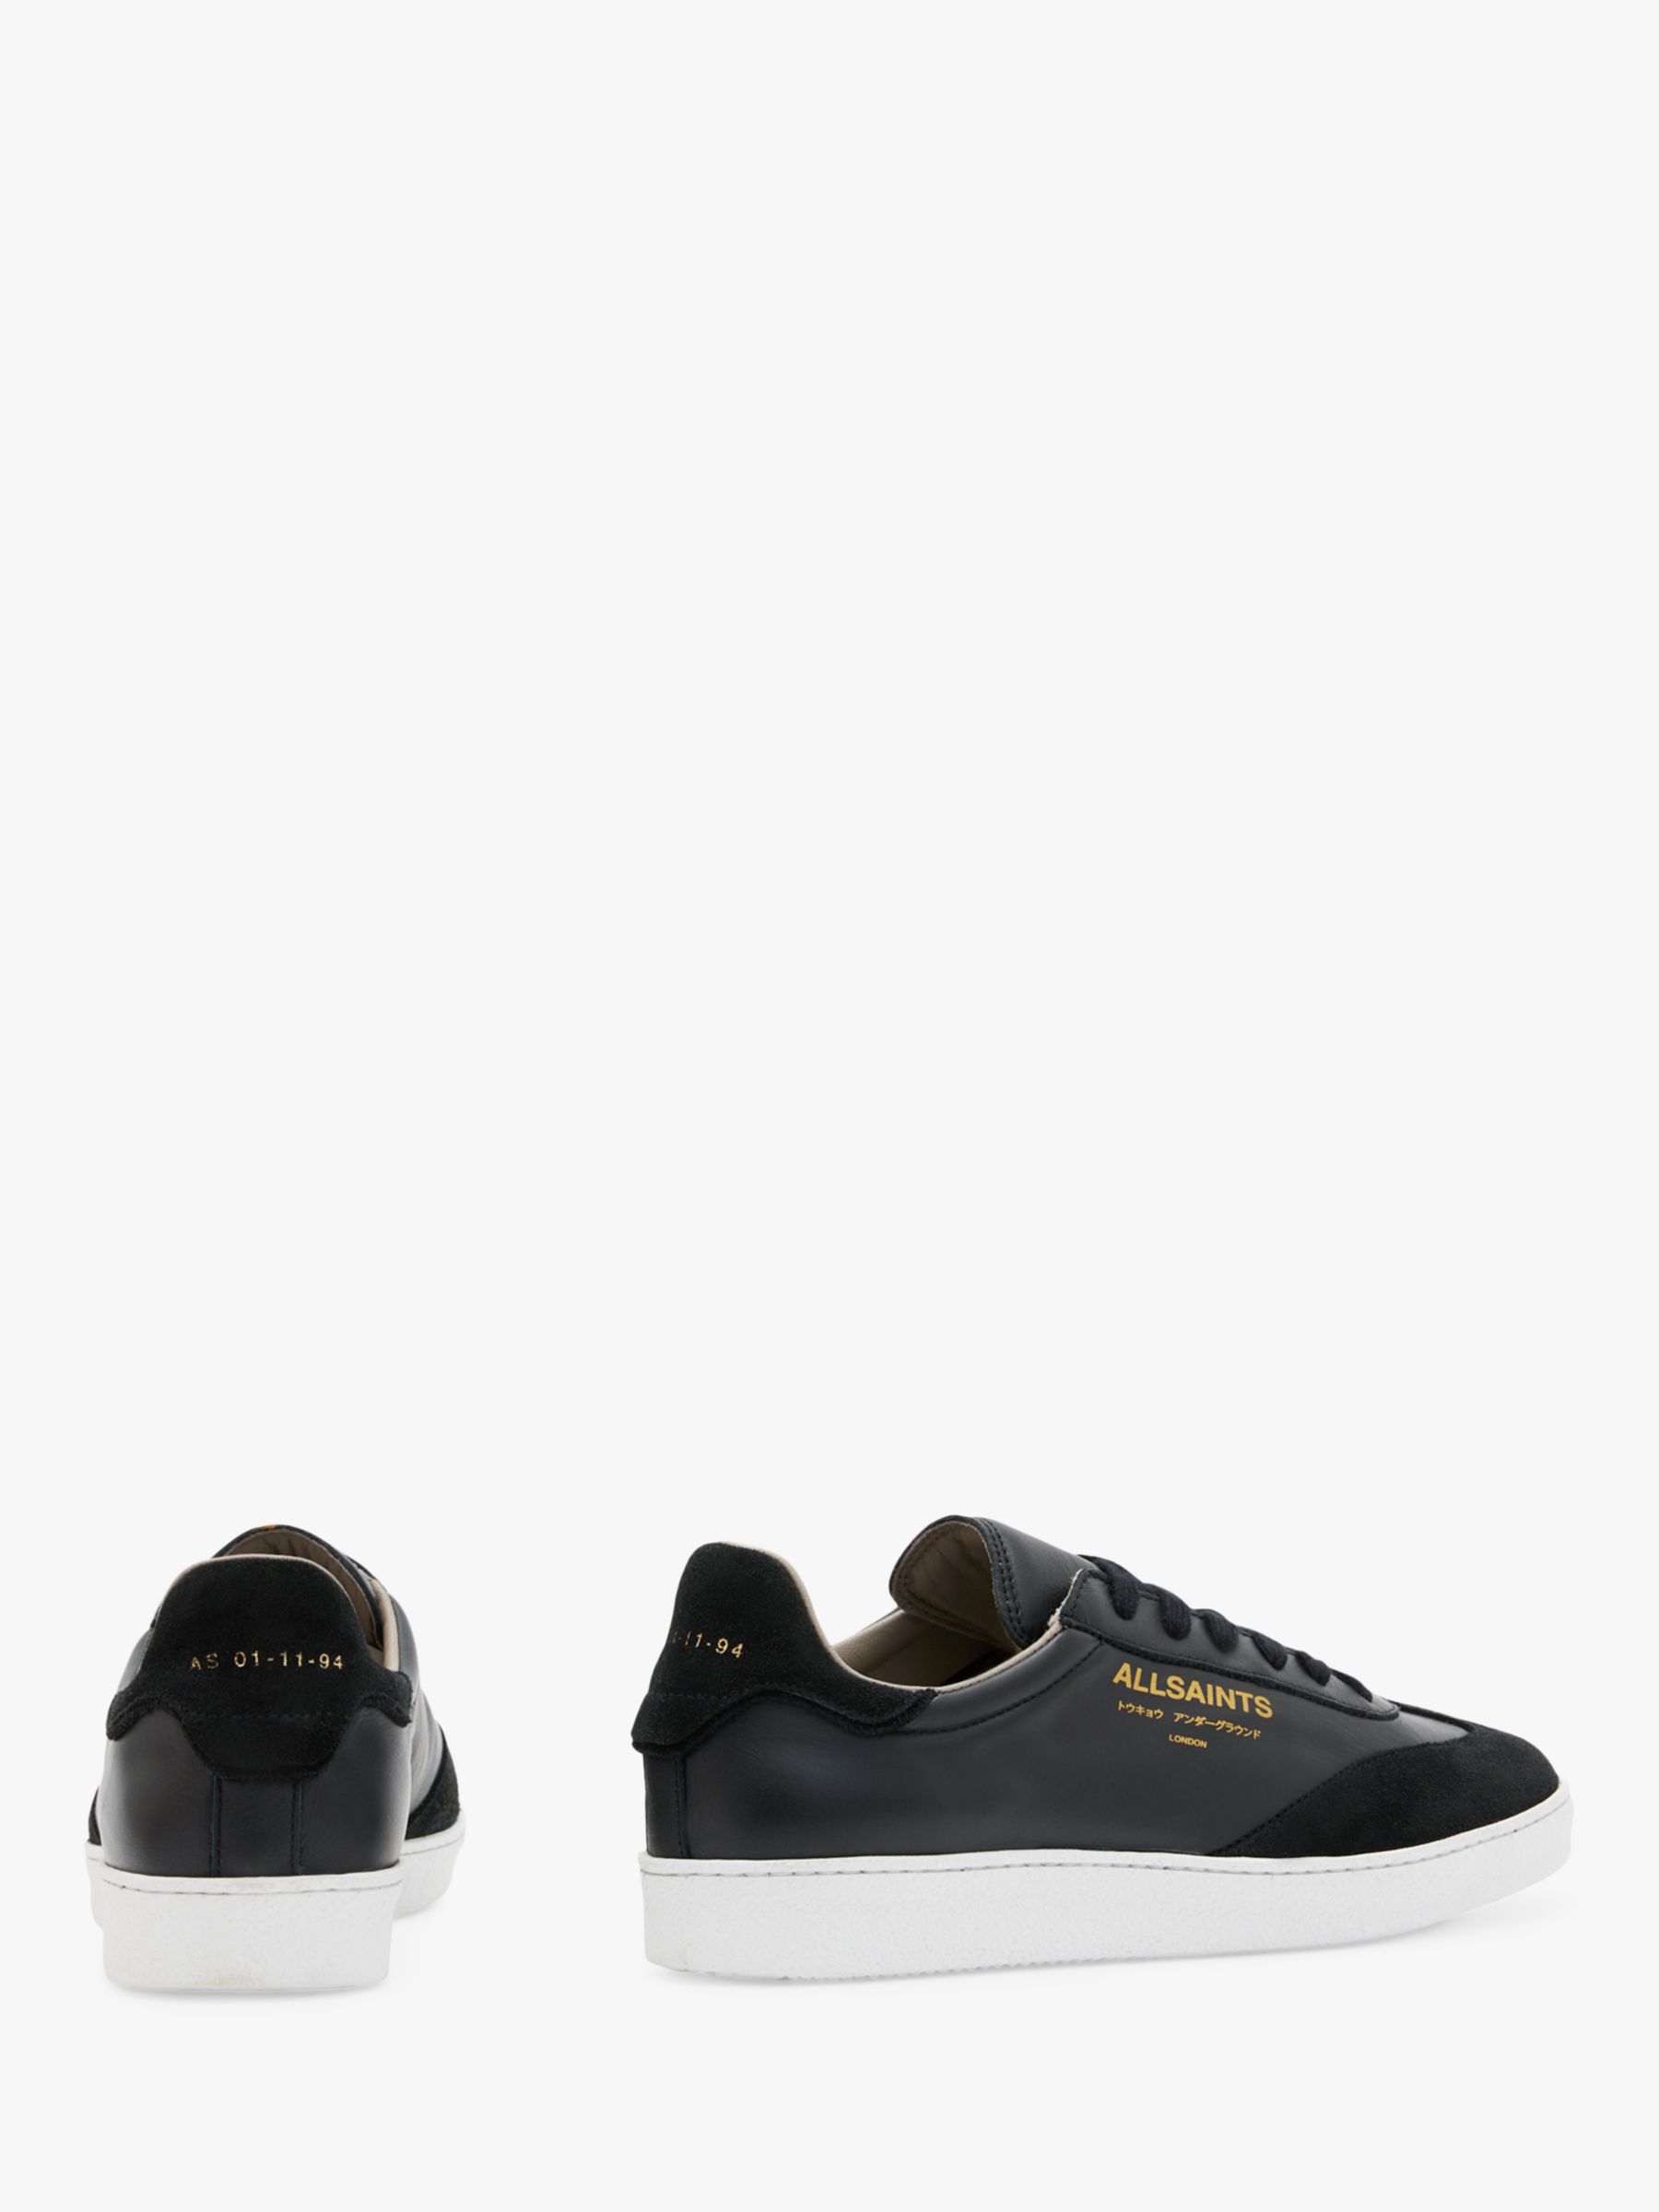 Buy AllSaints Thelma Leather Trainers Online at johnlewis.com